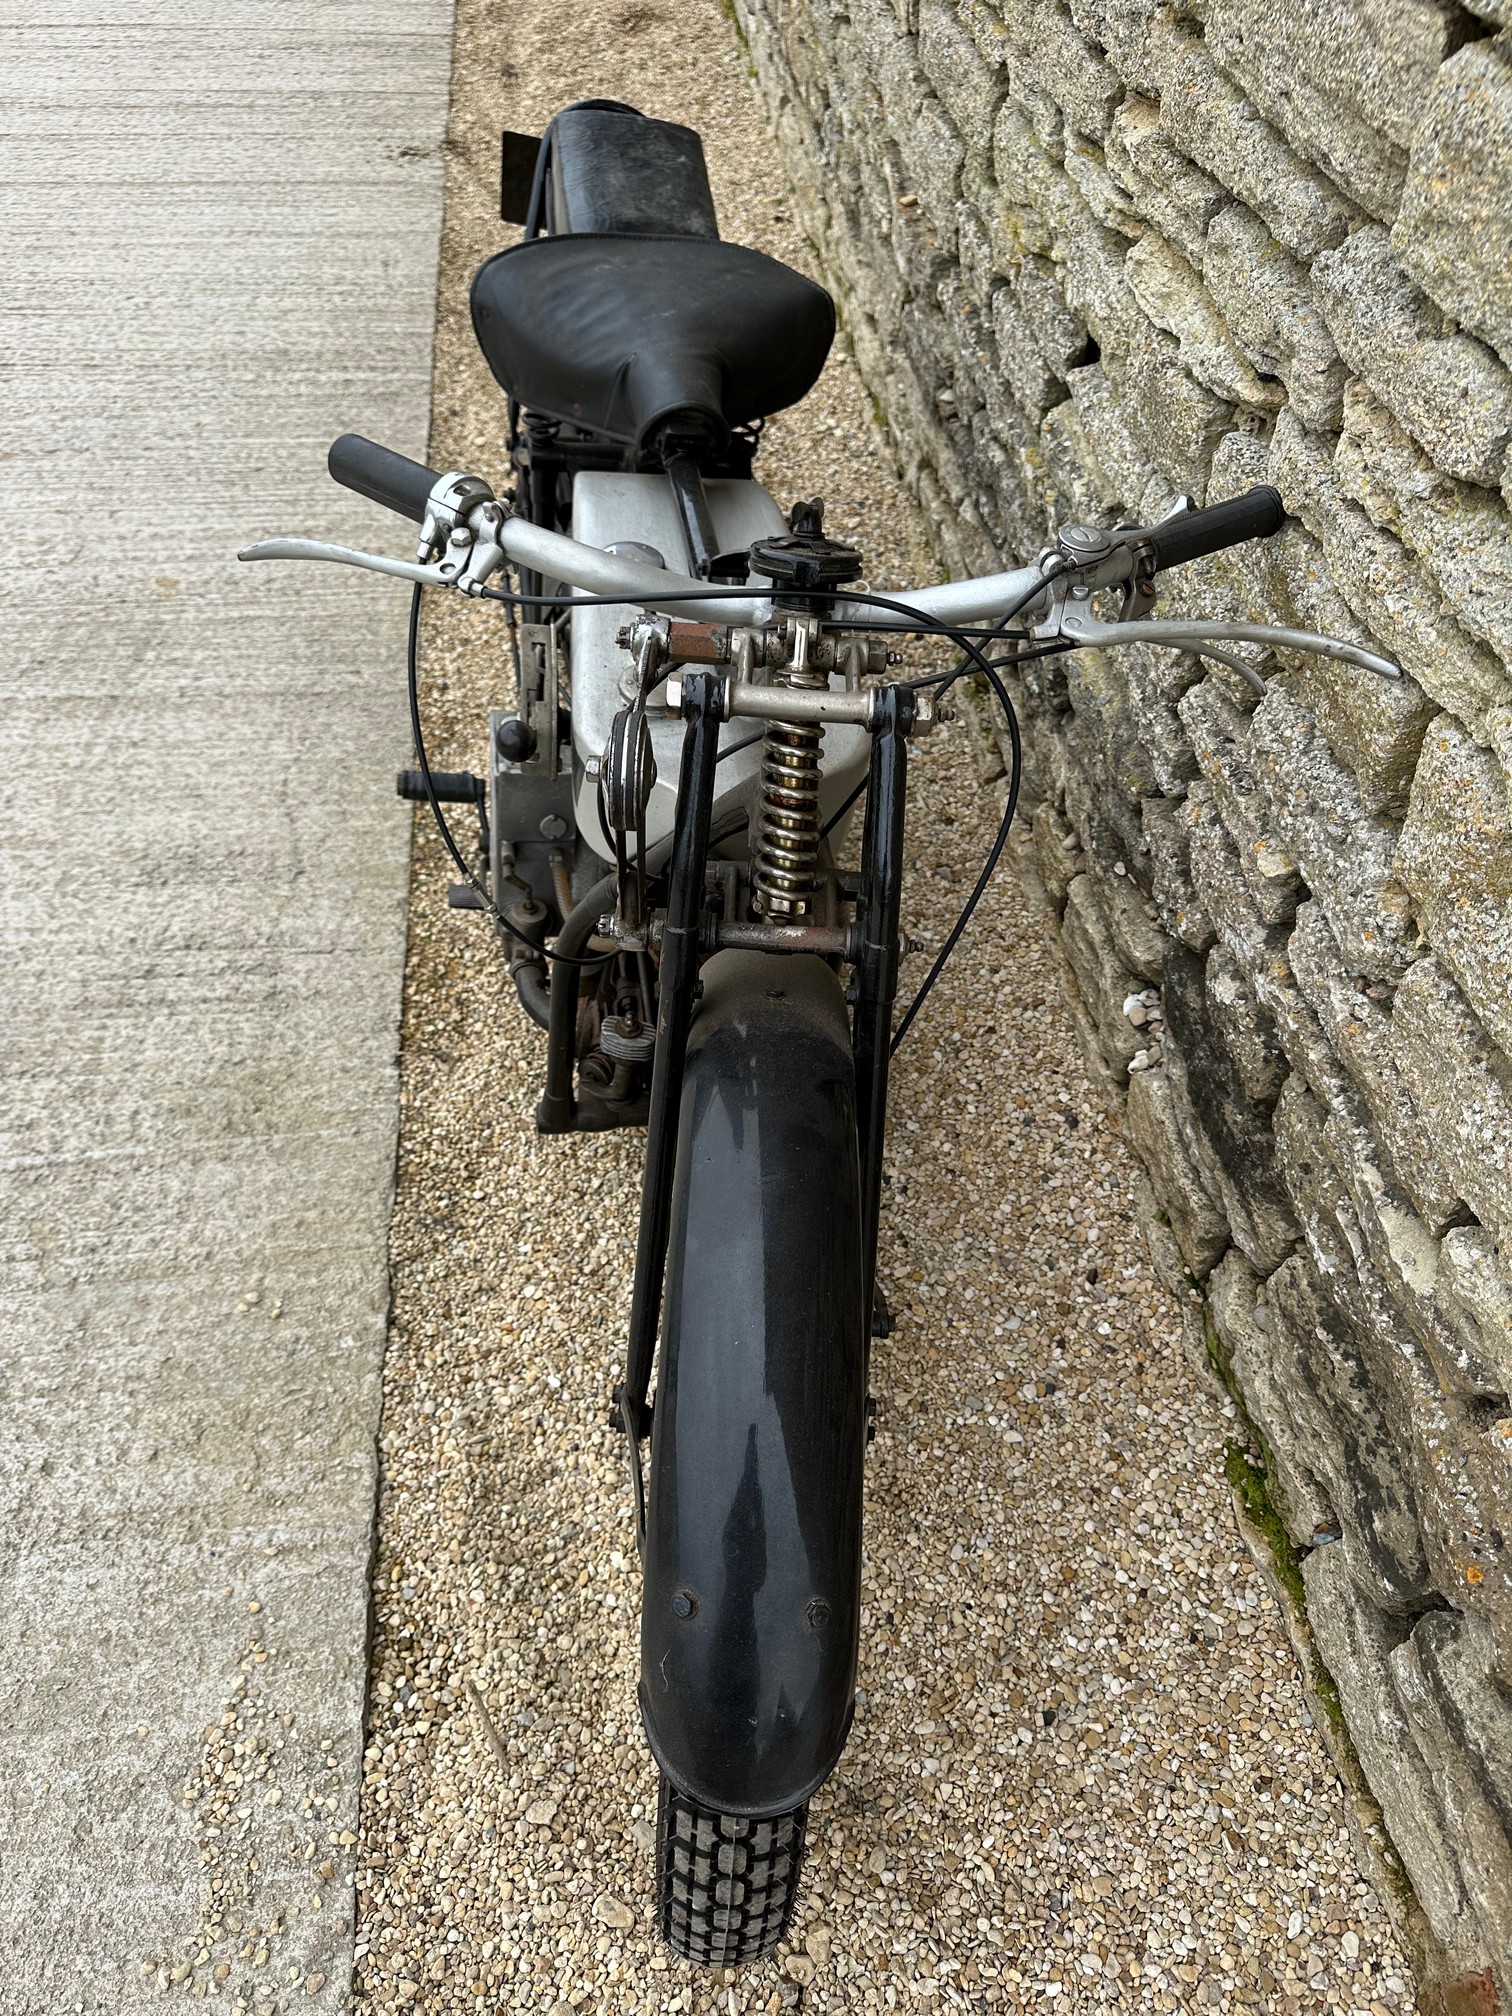 1930 DOUGLAS SW5 500cc SPRINT MOTORBIKE CONVERTED TO ROAD USE - Image 5 of 6